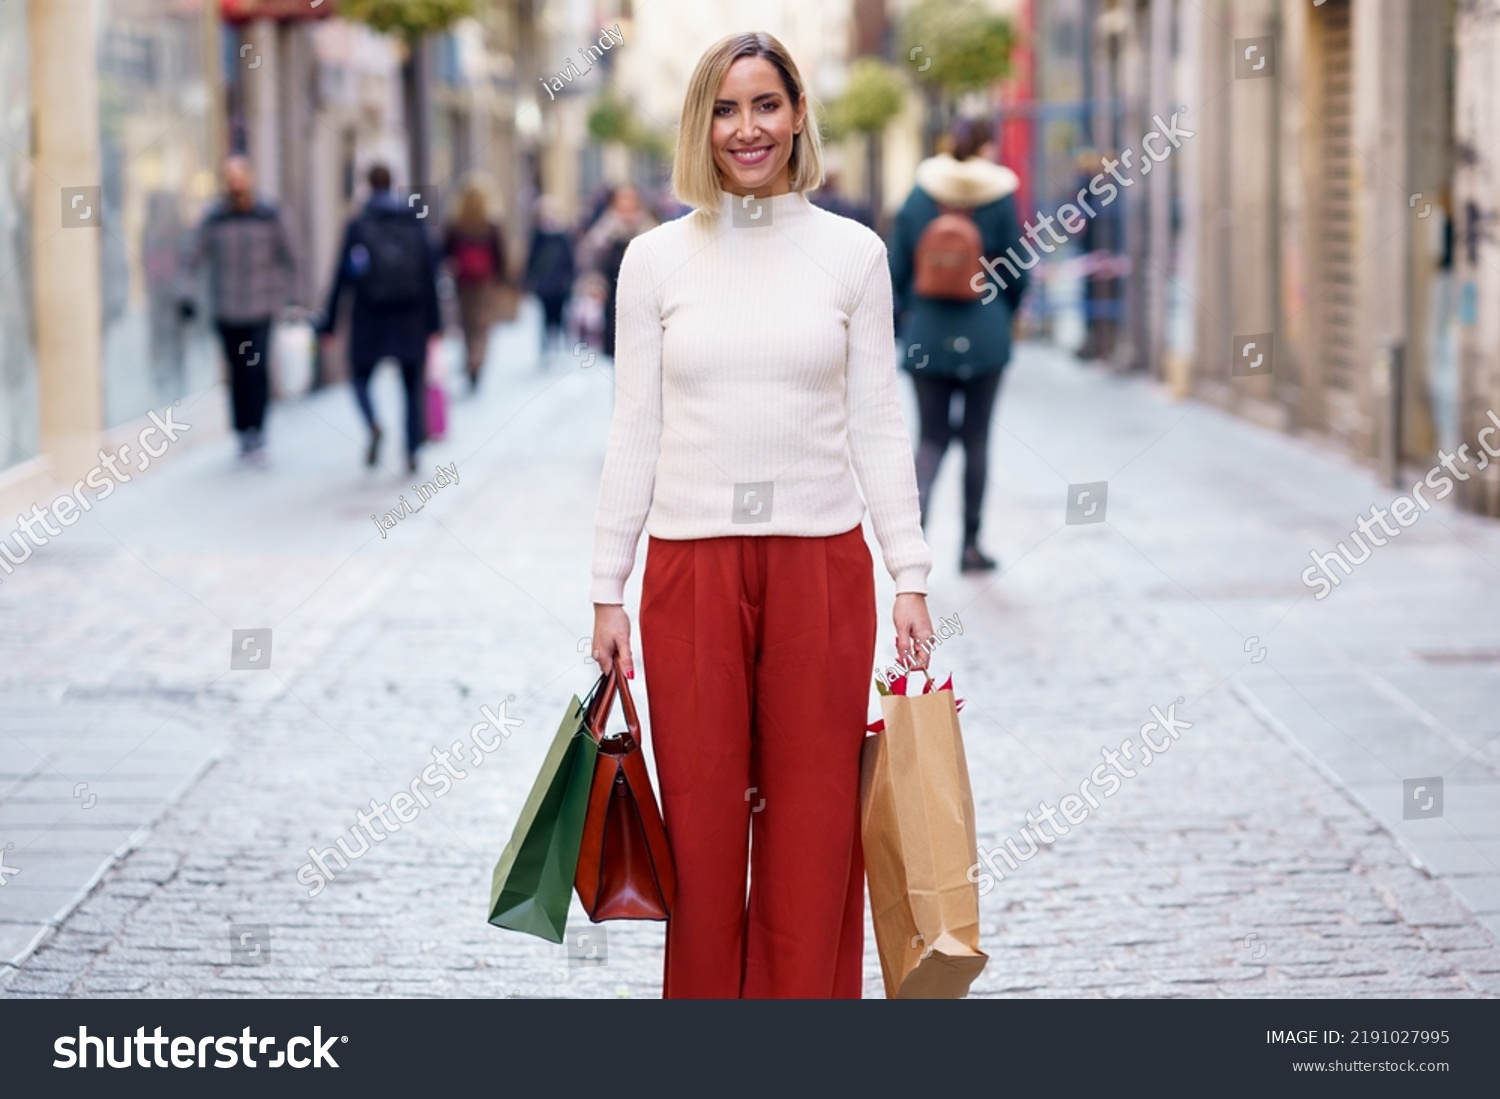 Satisfied female shopper in white turtleneck and pants standing with shopping packages and handbag on paved street and smiling at camera #2191027995